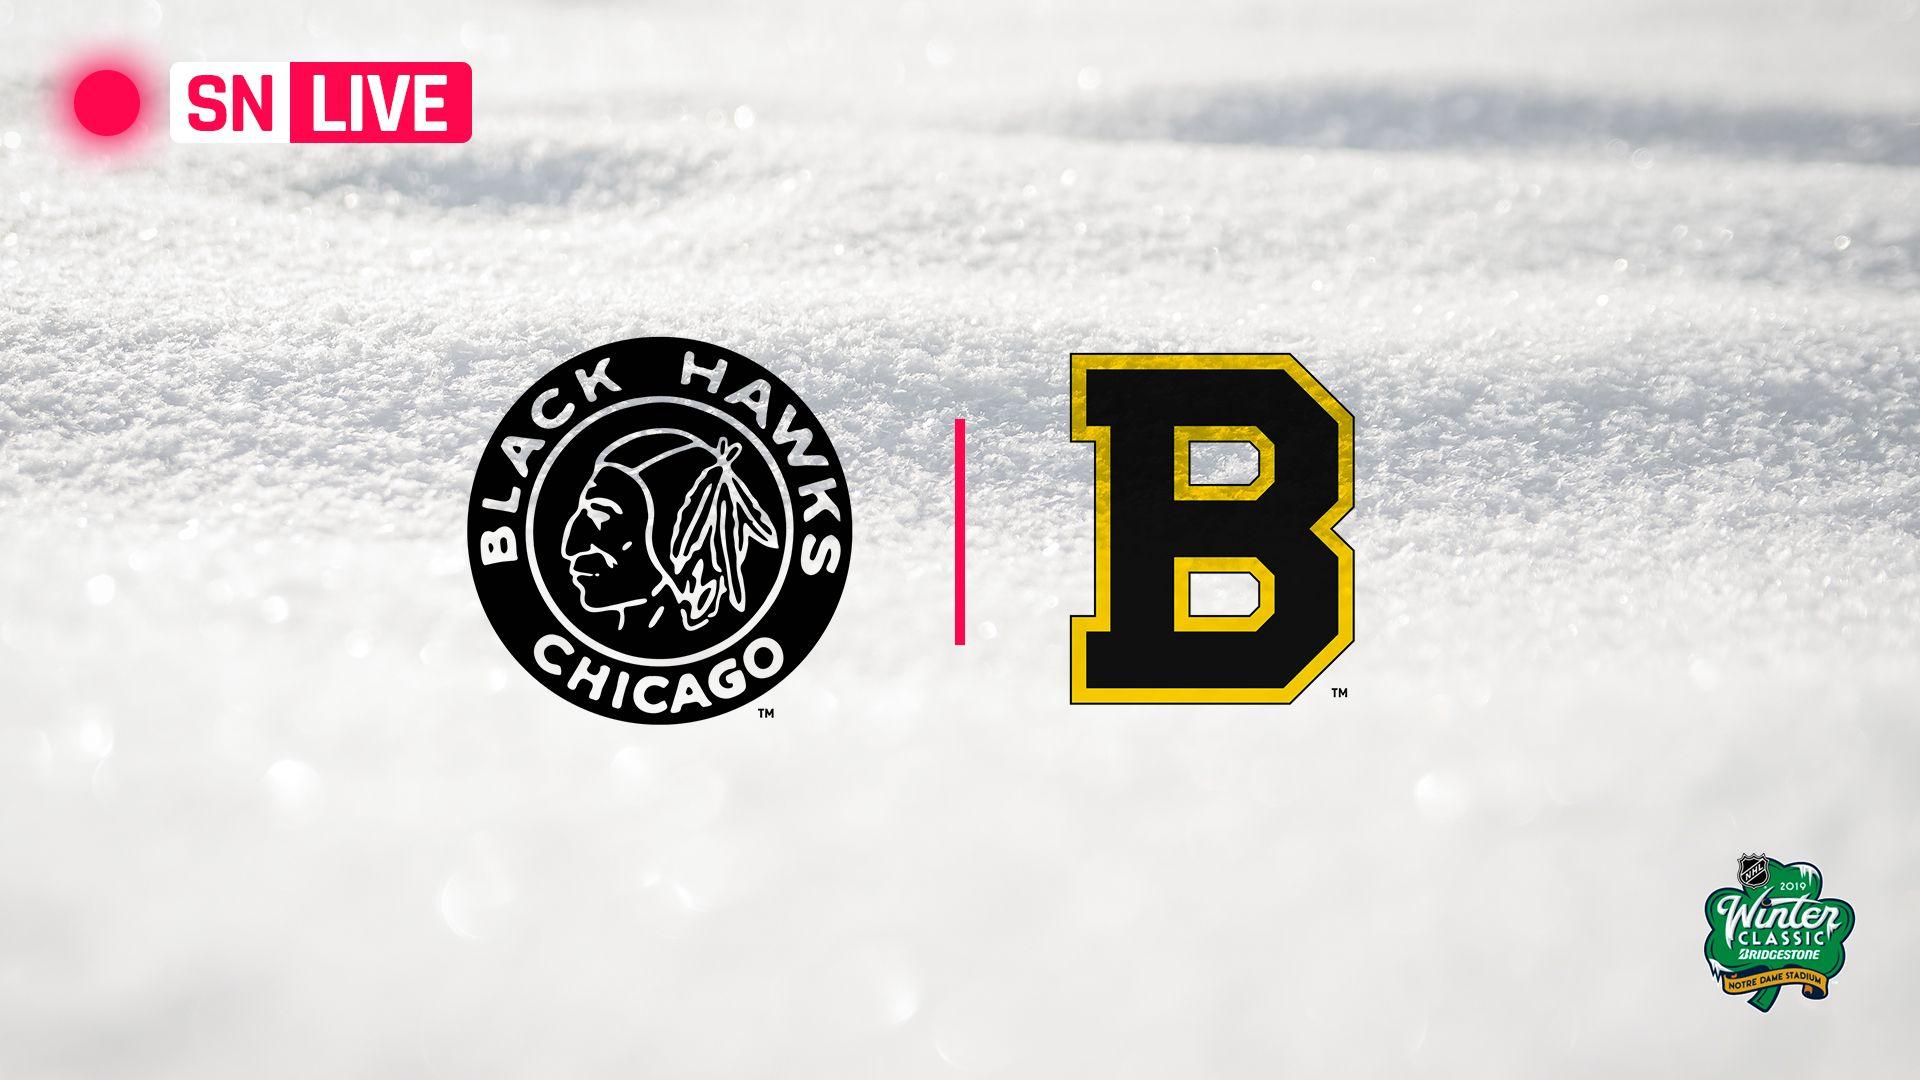 NHL Winter Classic 2019: Live updates, score, highlights from Bruins